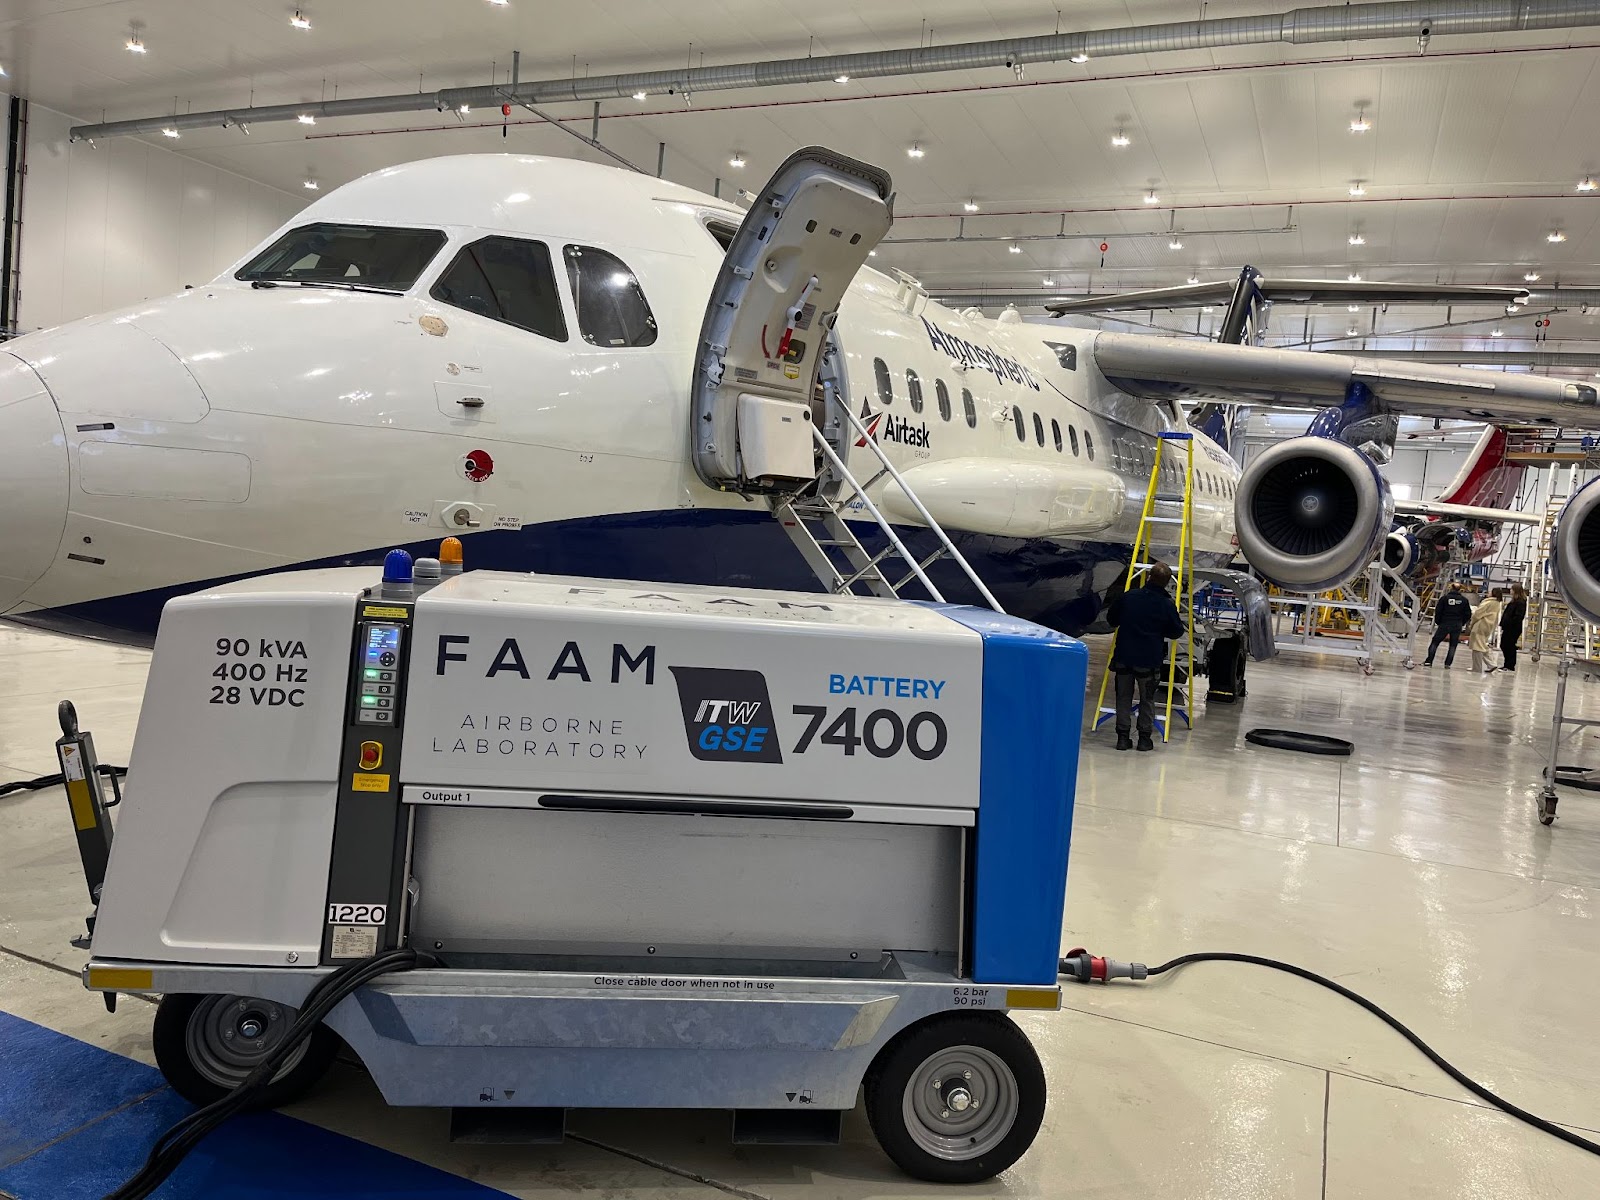 An electric ground power unit in front of a large blue and white research aircraft which is parked in a hangar.